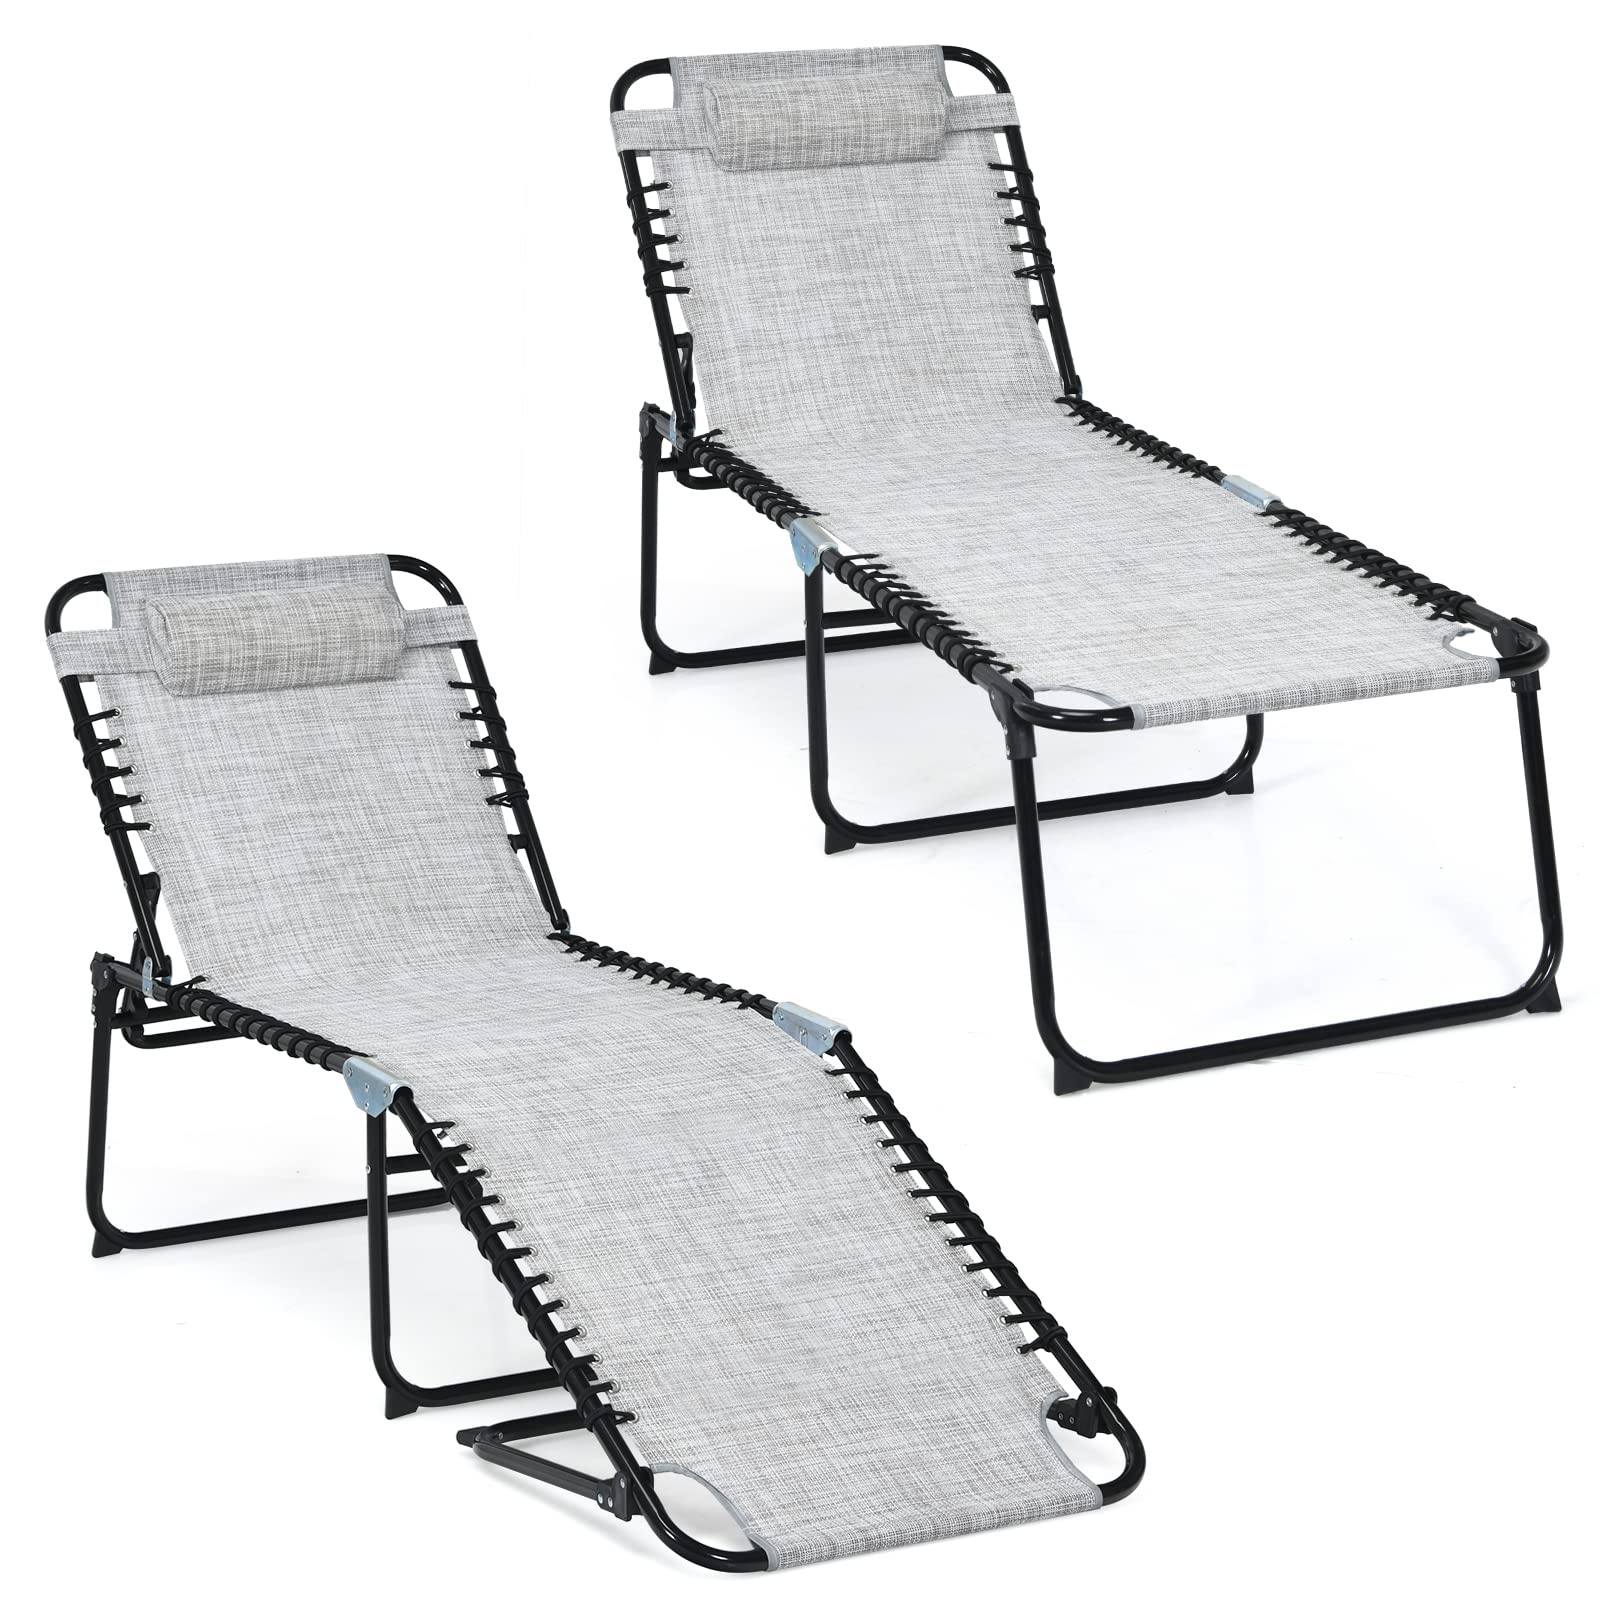 Giantex Patio Chaise Lounge Chair Foldable W/Adjustable Positions